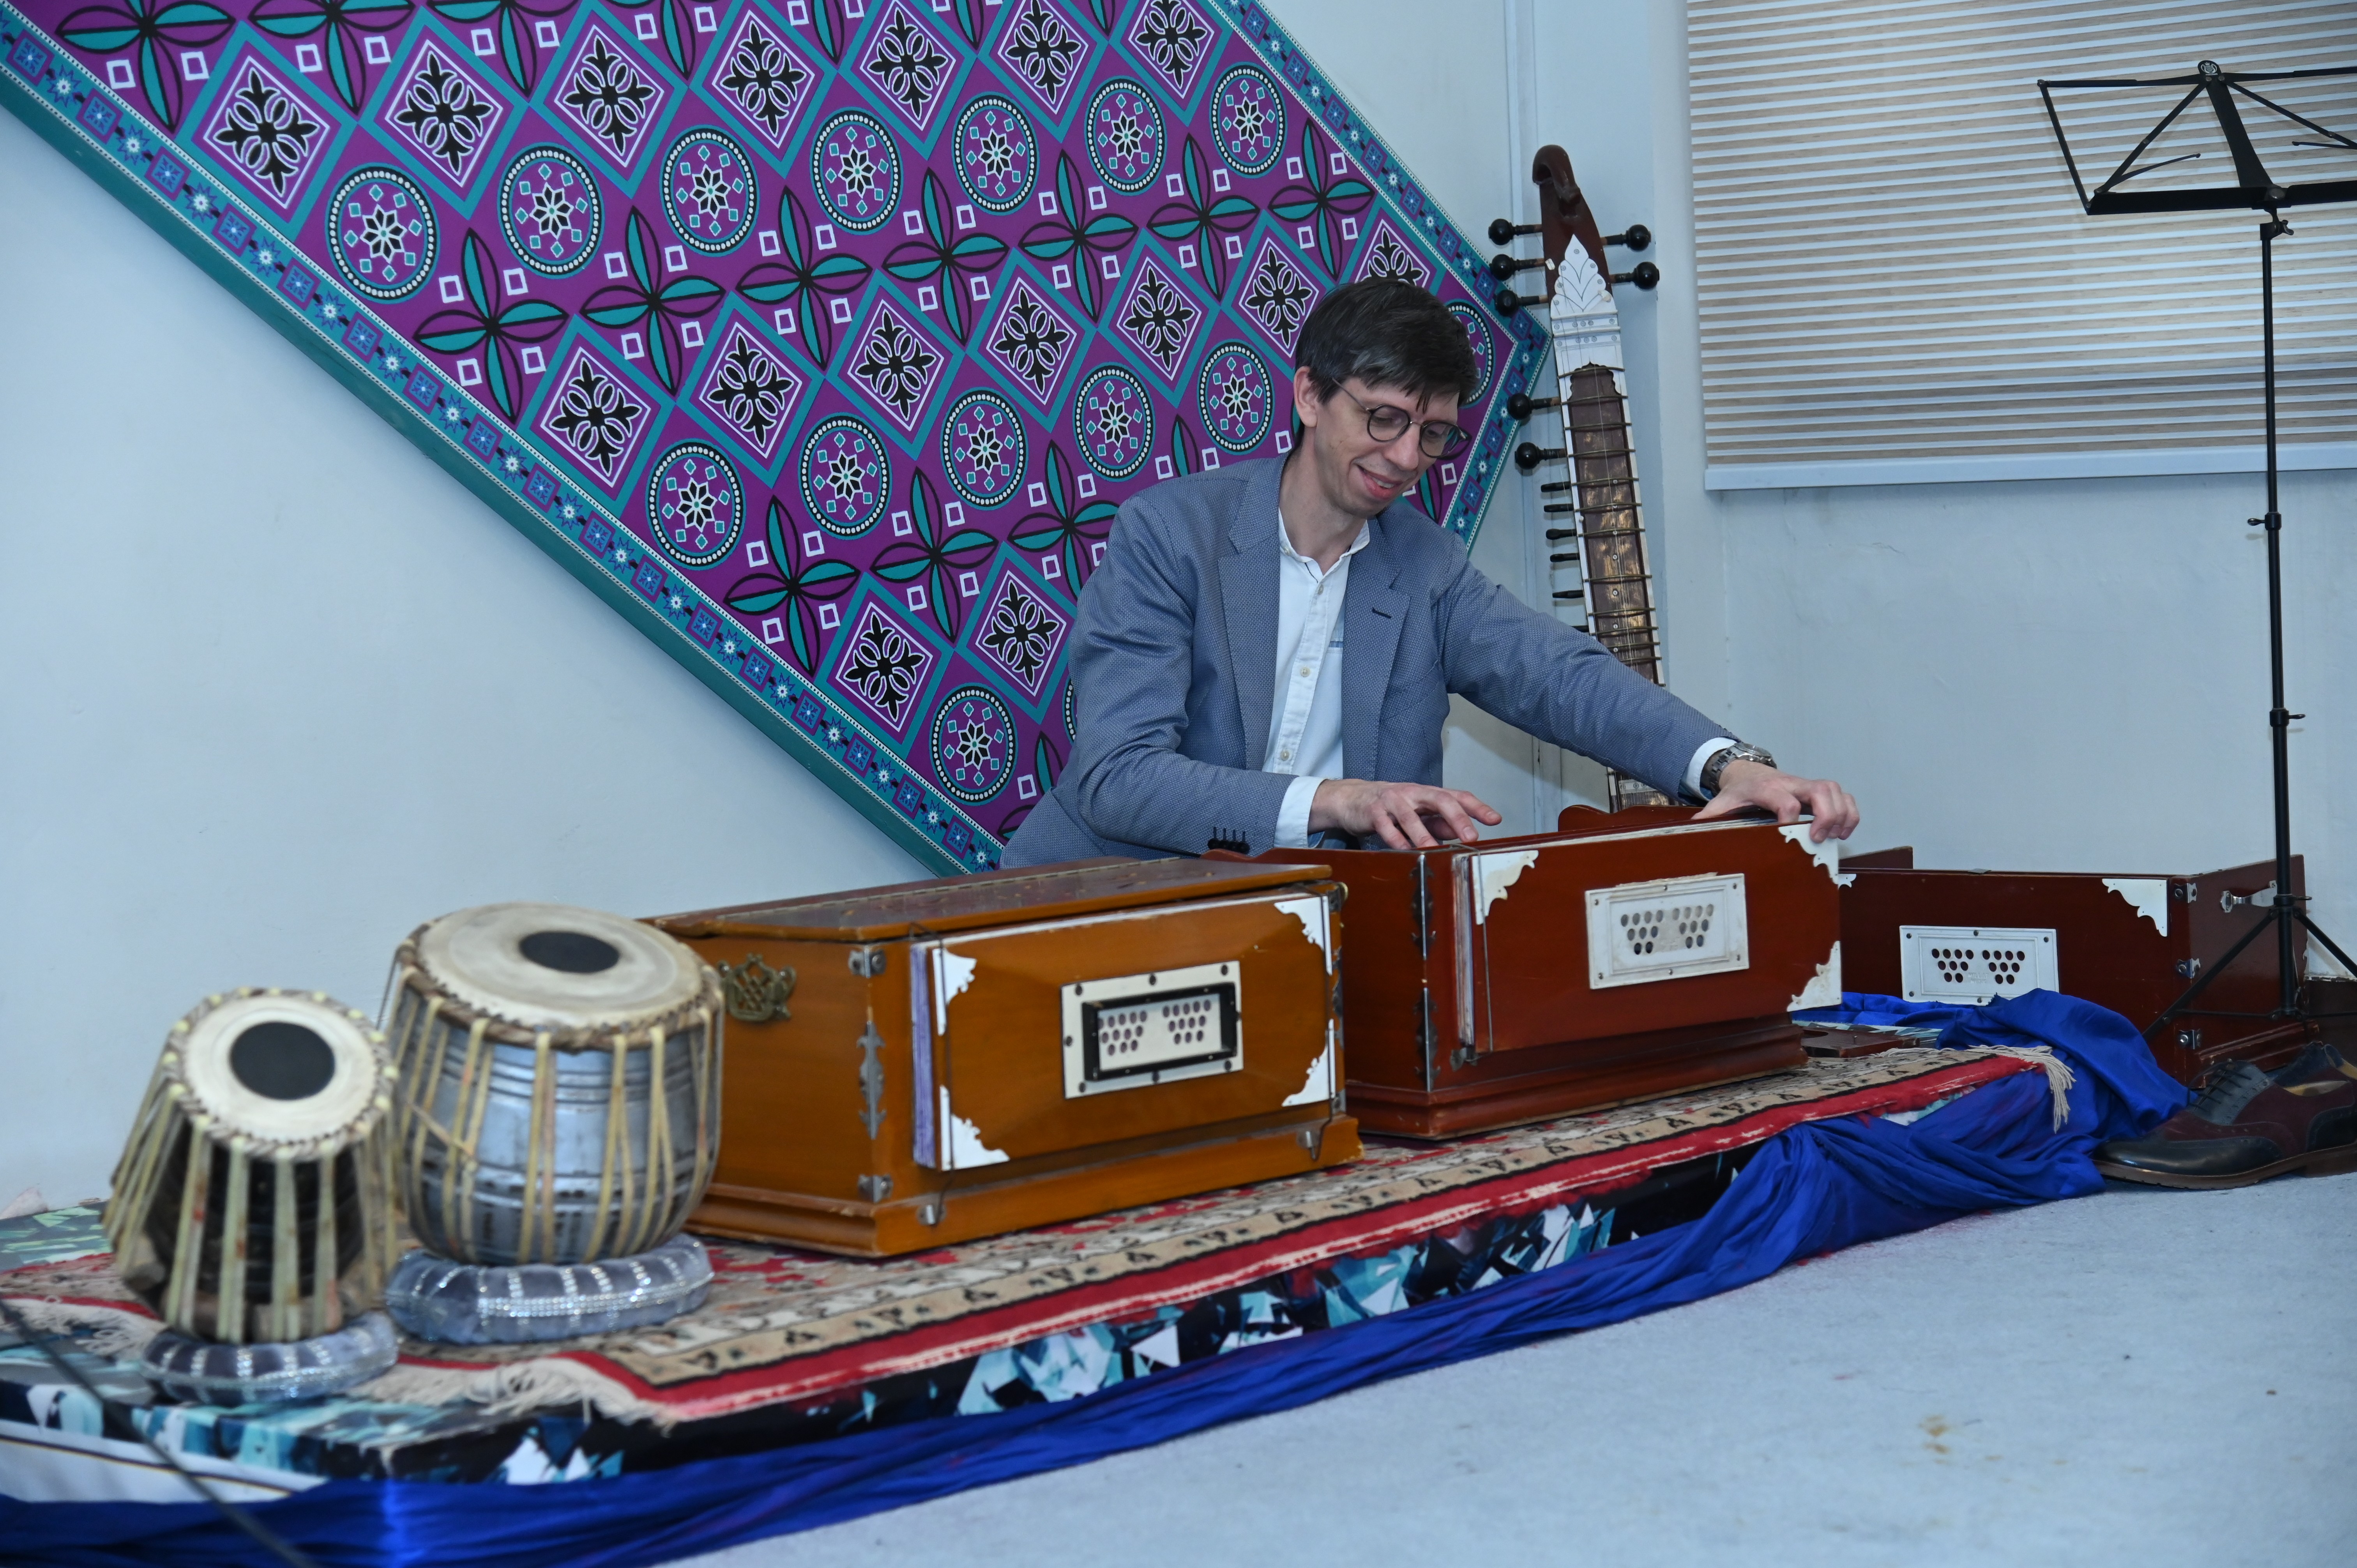 an artist playing Harmonium, free-reed keyboard instrument that produces sound when wind sent by foot-operated below through a pressure-equalizing air reservoir at PNCA